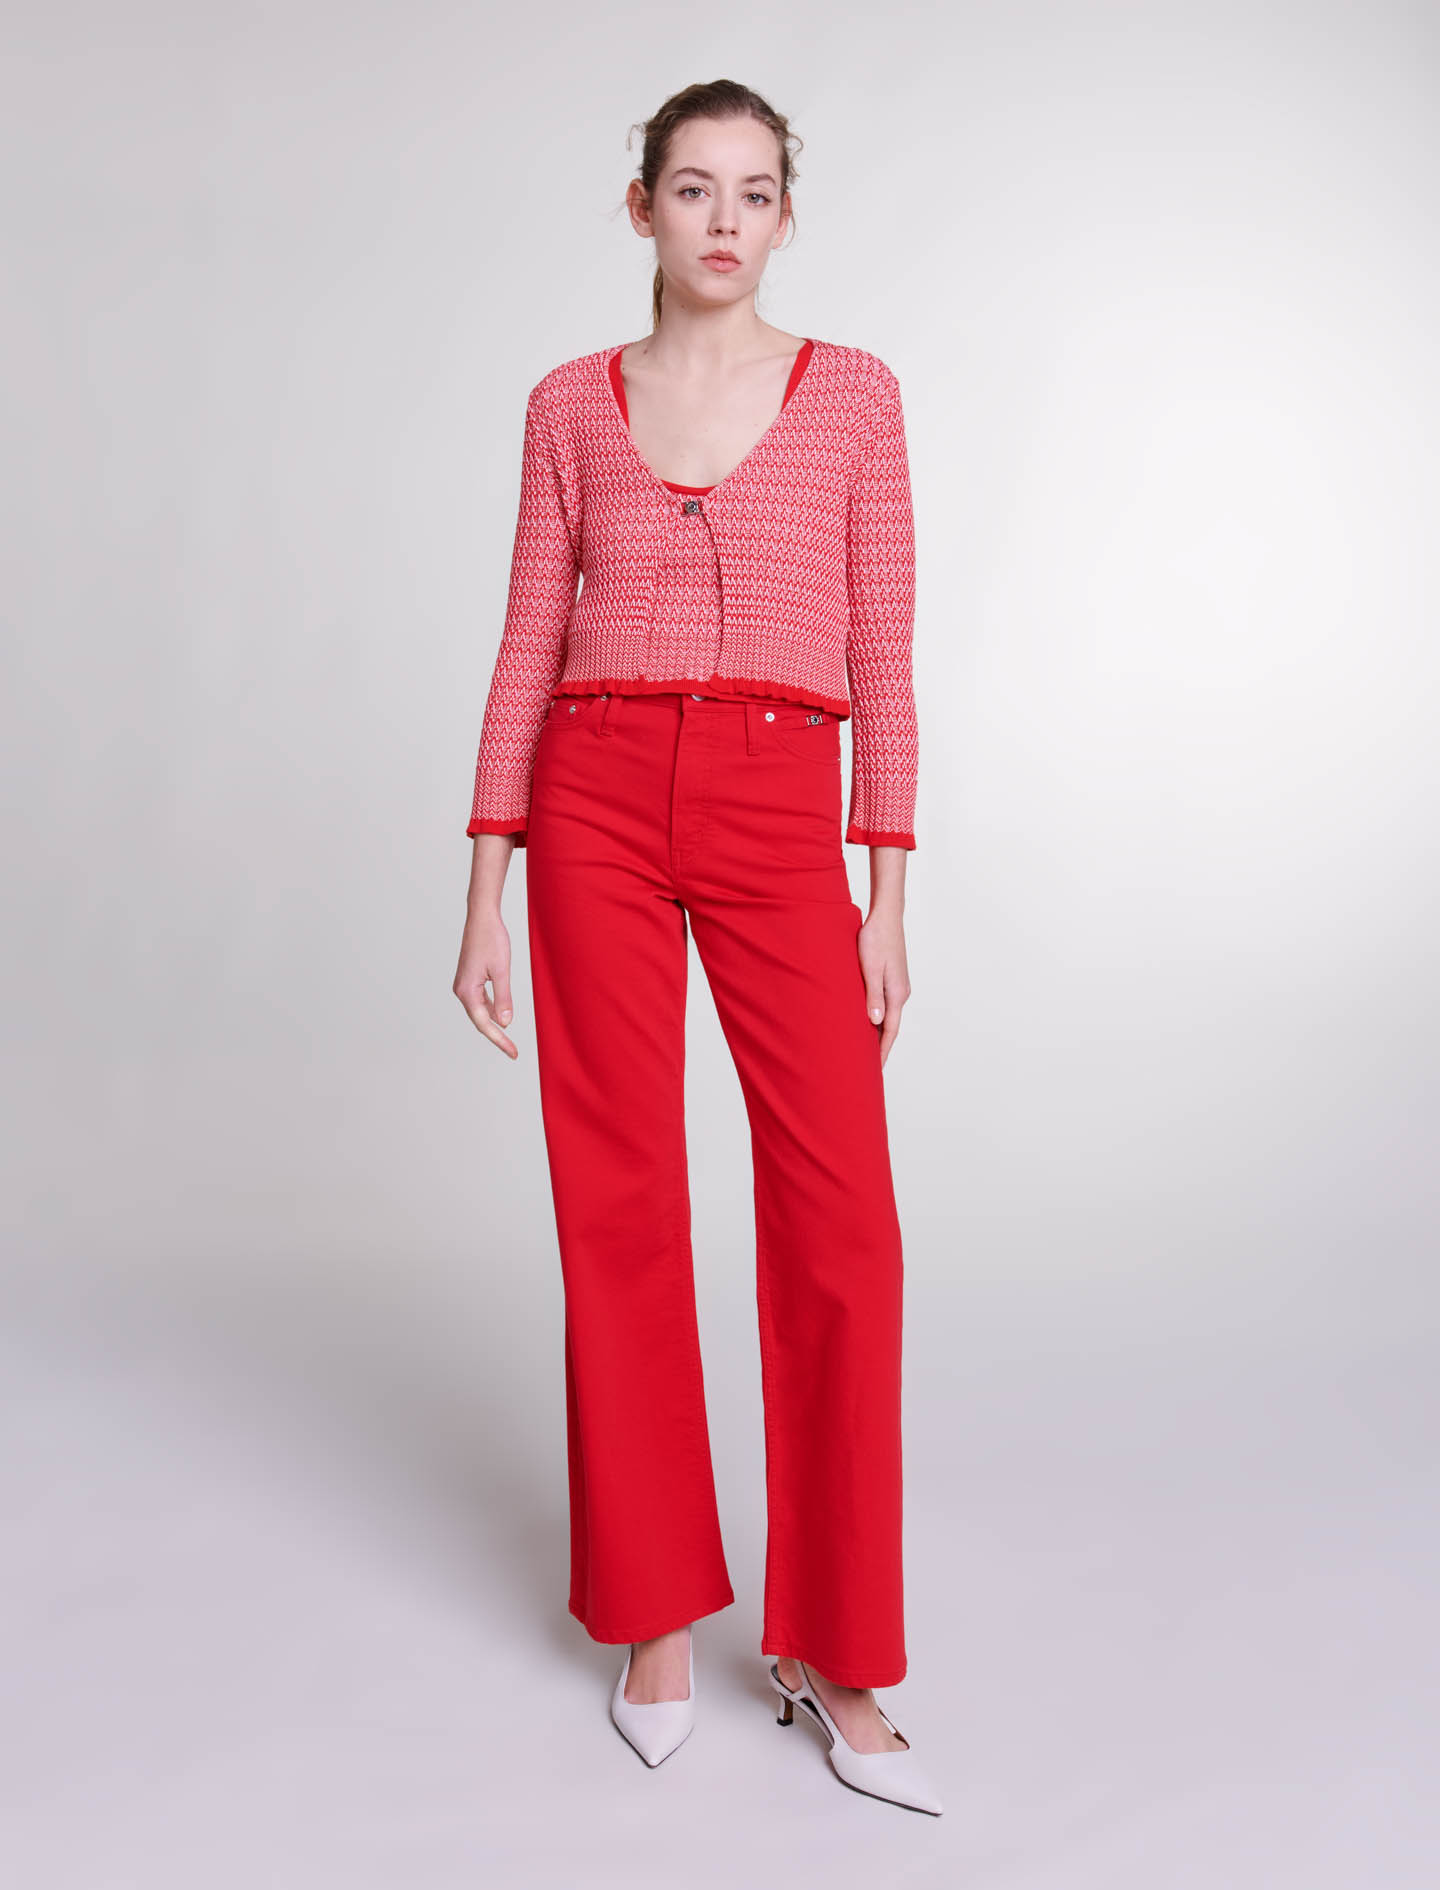 Mixte's viscose, Herringbone knit twin set for Spring/Summer, size Mixte-Sweaters & Cardigans-US L / FR 3, in color Red / Red